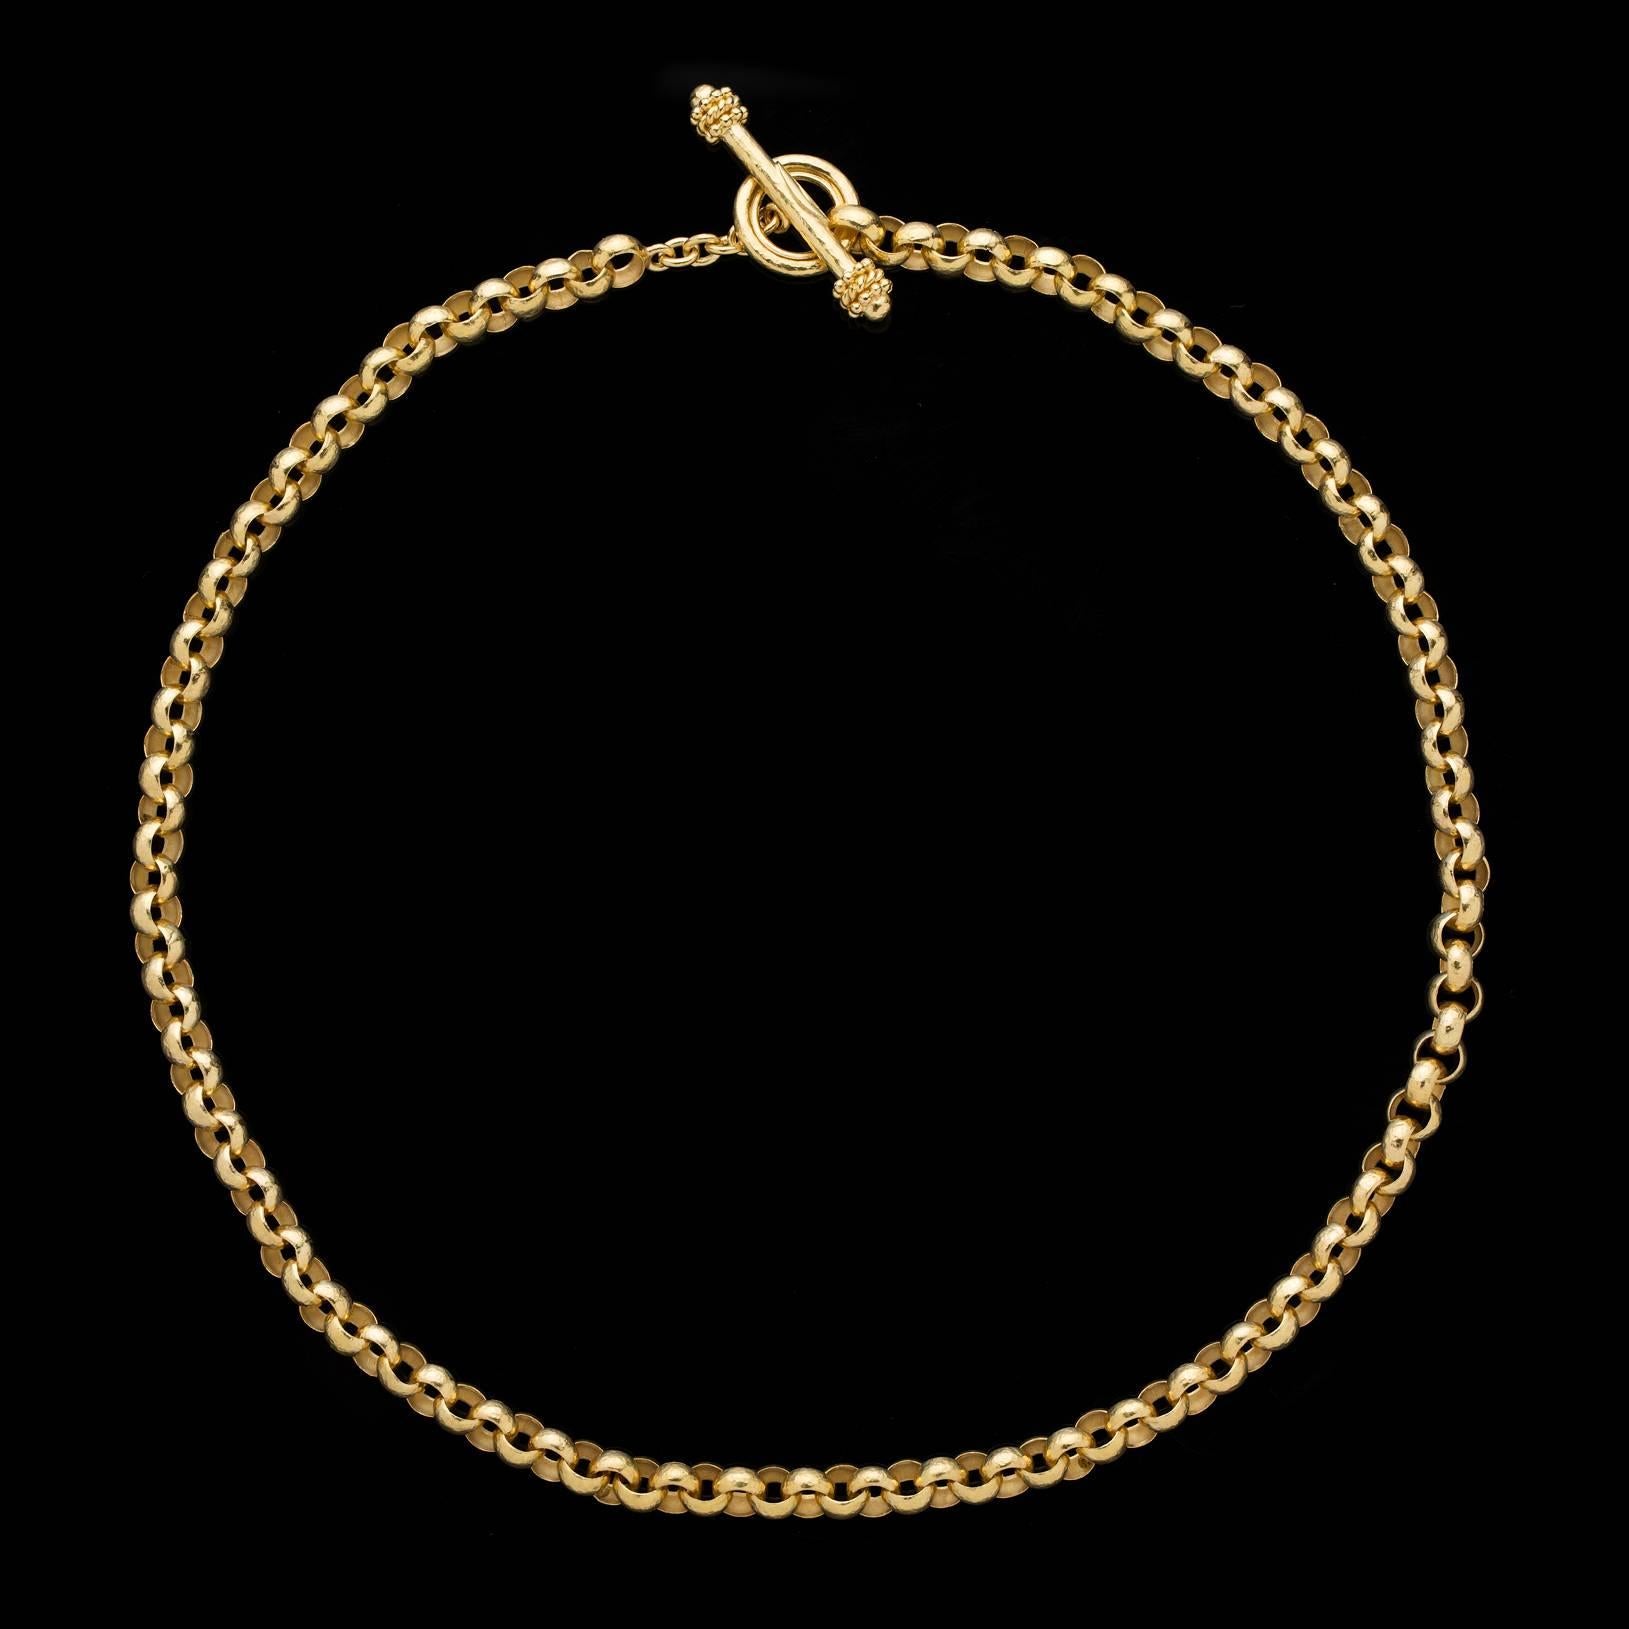 Elizabeth Locke 19Kt stamped Yellow Gold 18 inch Rolo Link Chain Necklace with a Toggle Closure.   This piece weighs 46.5 grams.